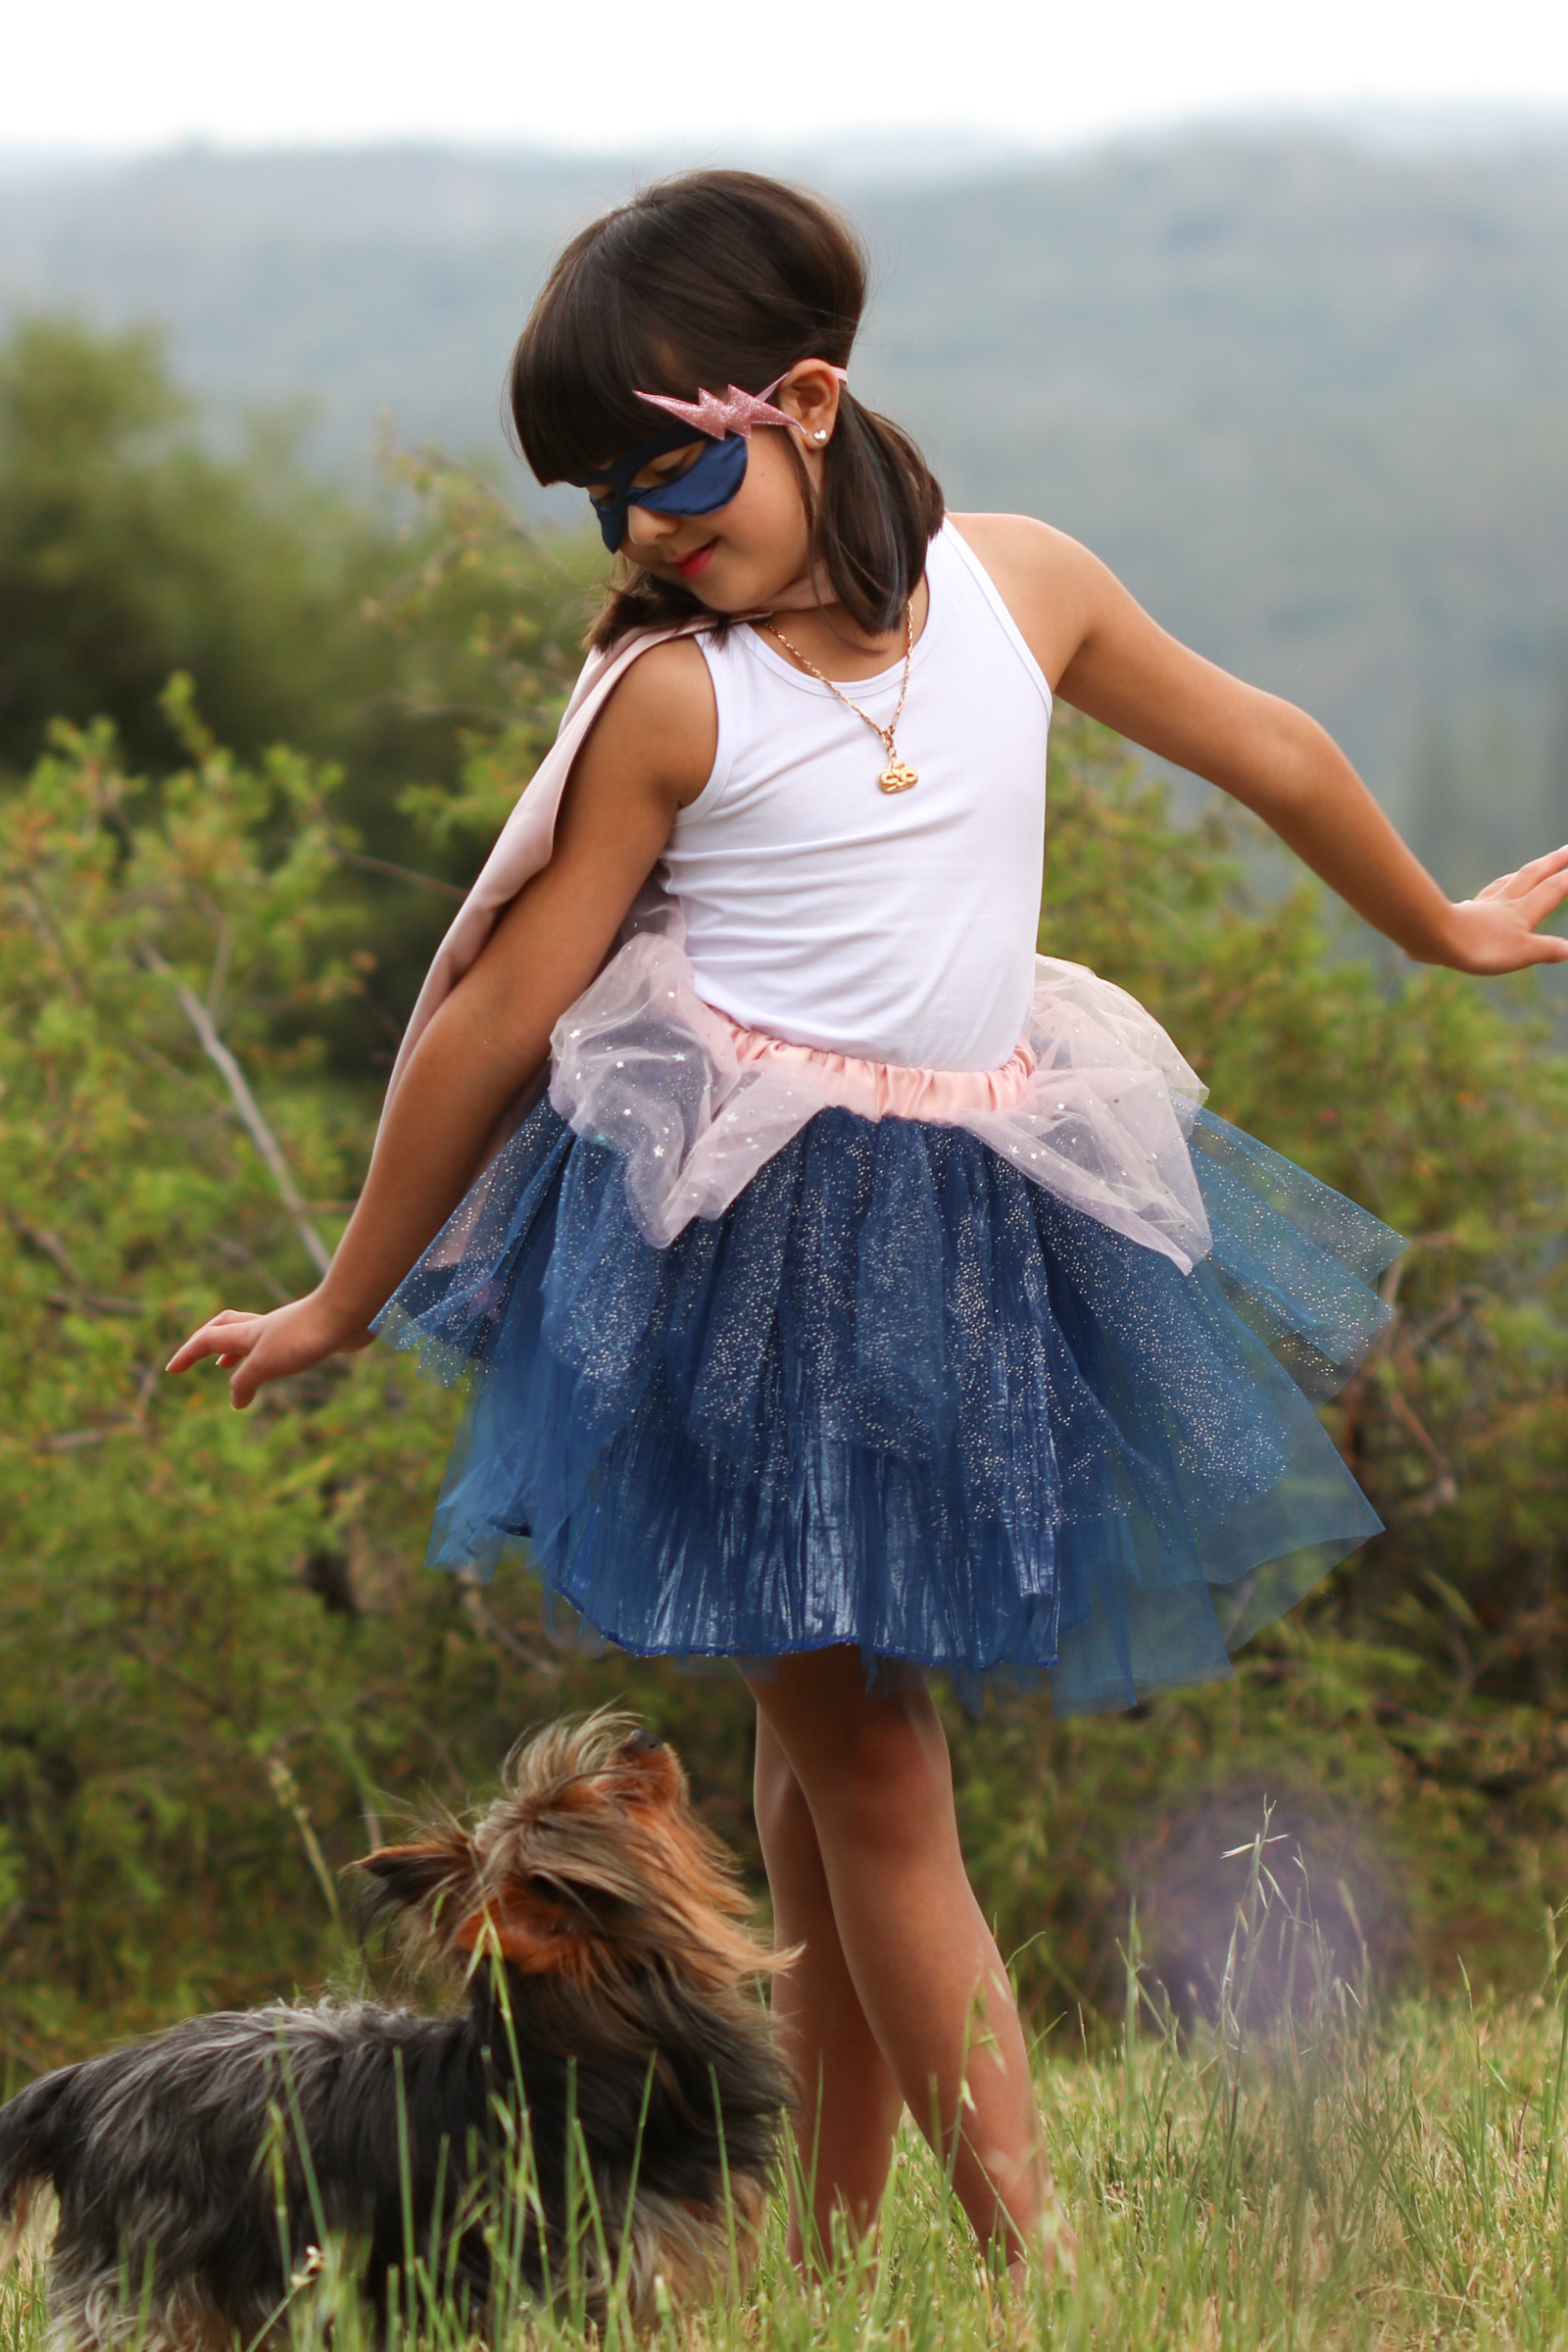 Great Pretenders Superhero Fancy Dress for Girls - Includes tutu, cape and  mask! girl